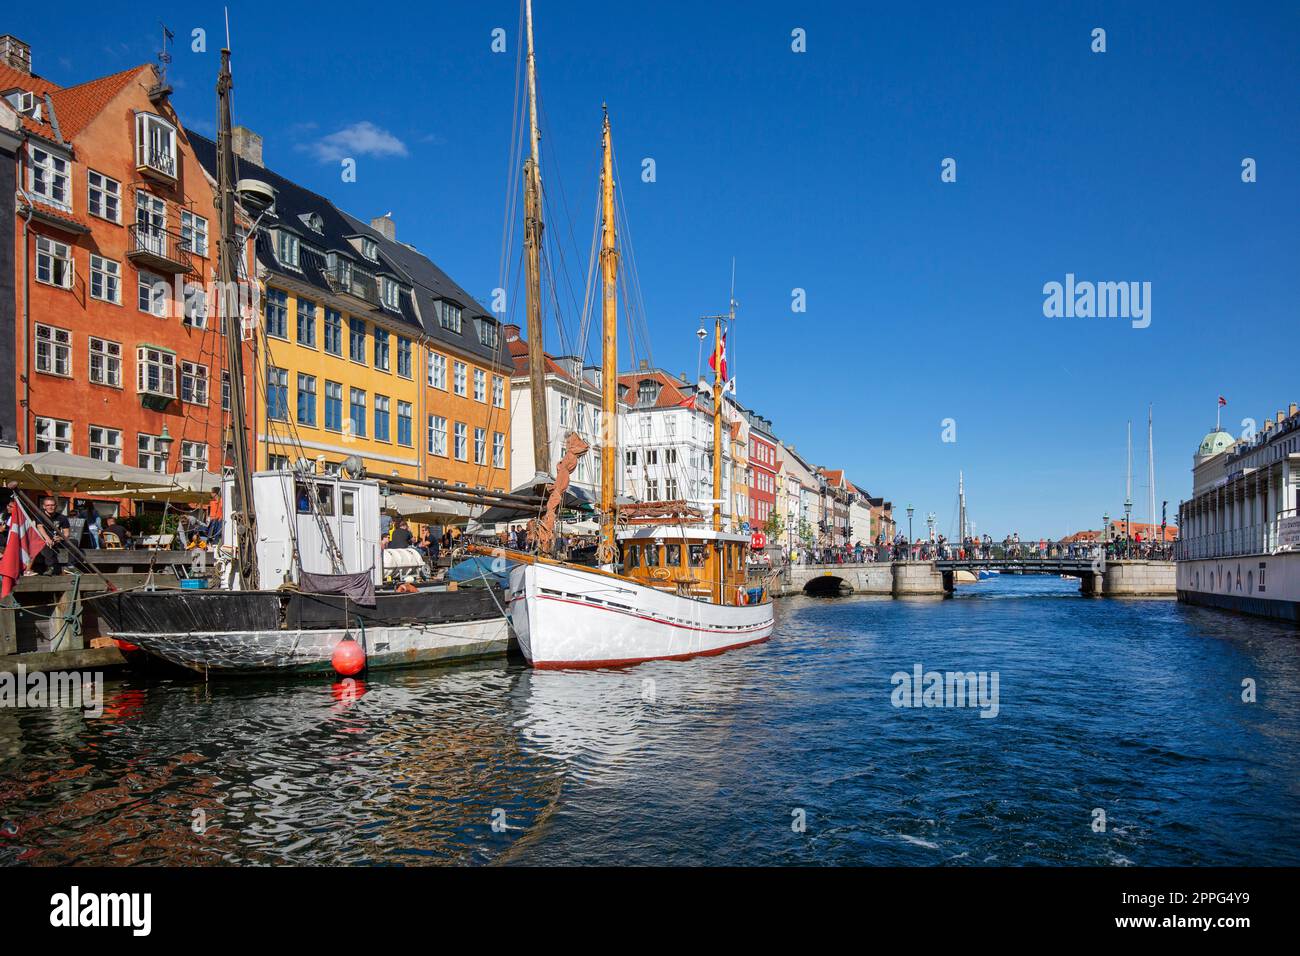 Colorfur houses on the canal in Nyhavn, ships moored at the waterfront, Copenhagen, Denmark Stock Photo